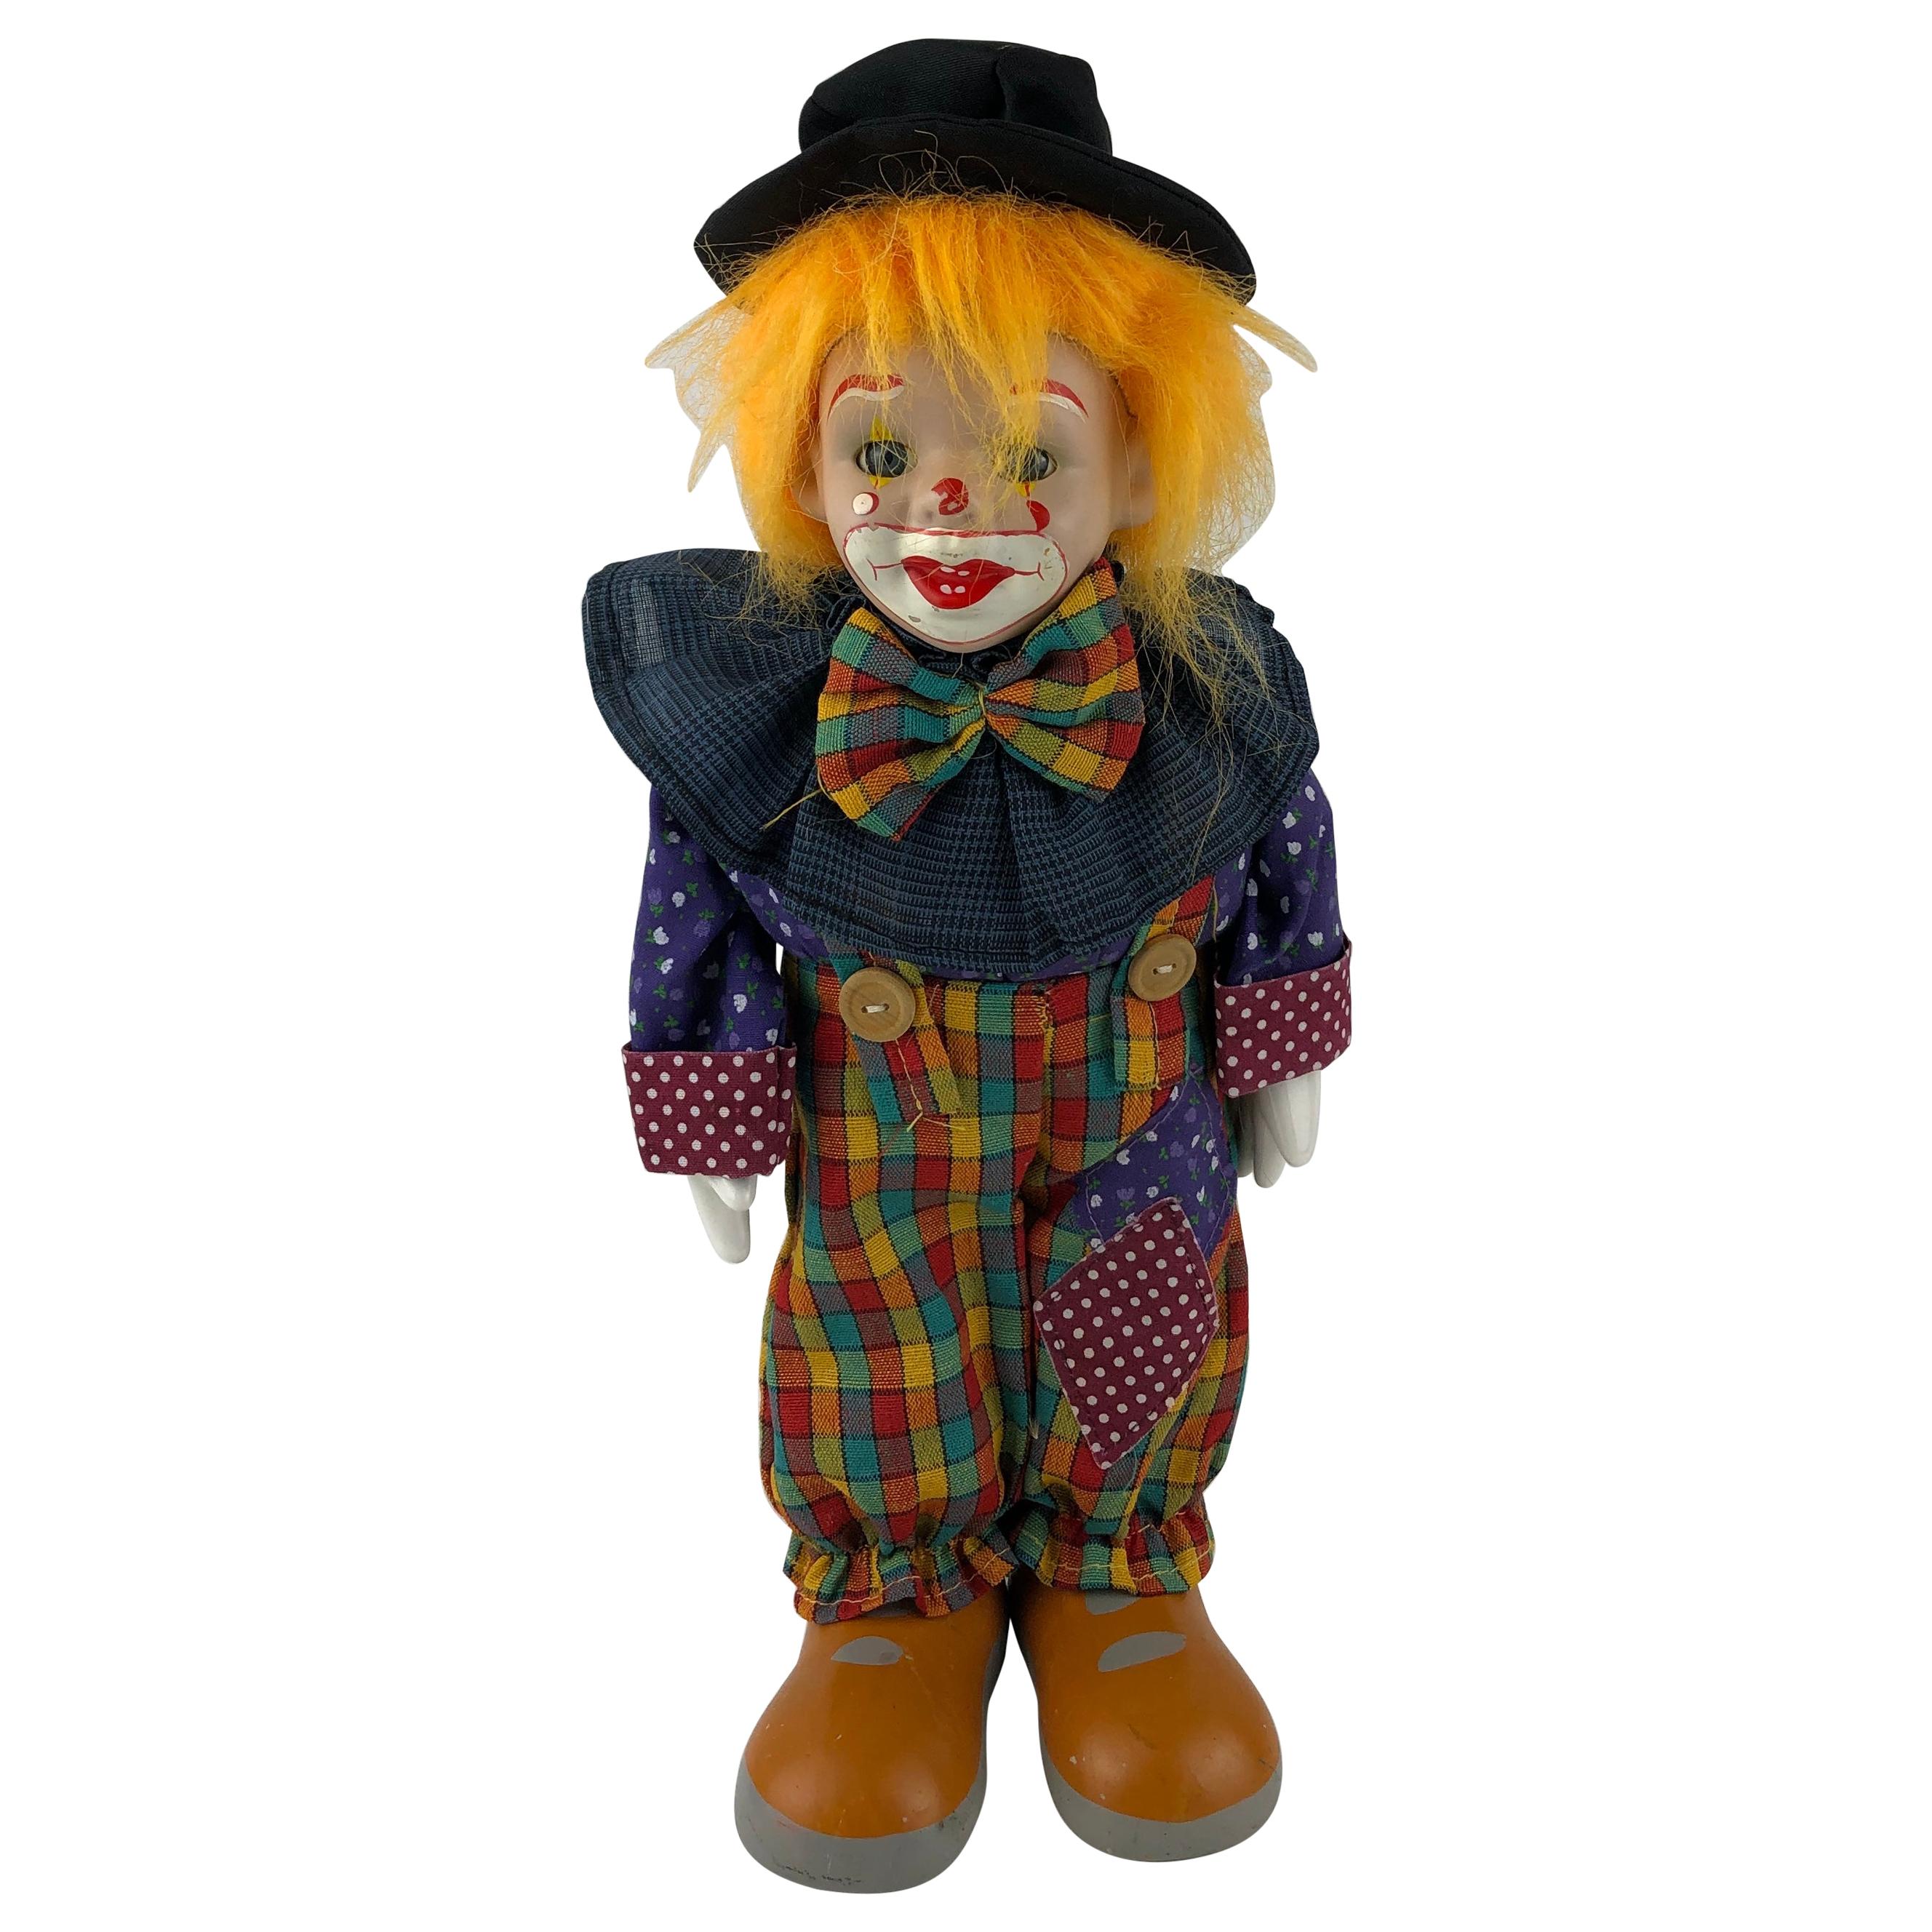 Adorable and Therapeutic Musical Clown Automaton Figure/Toy